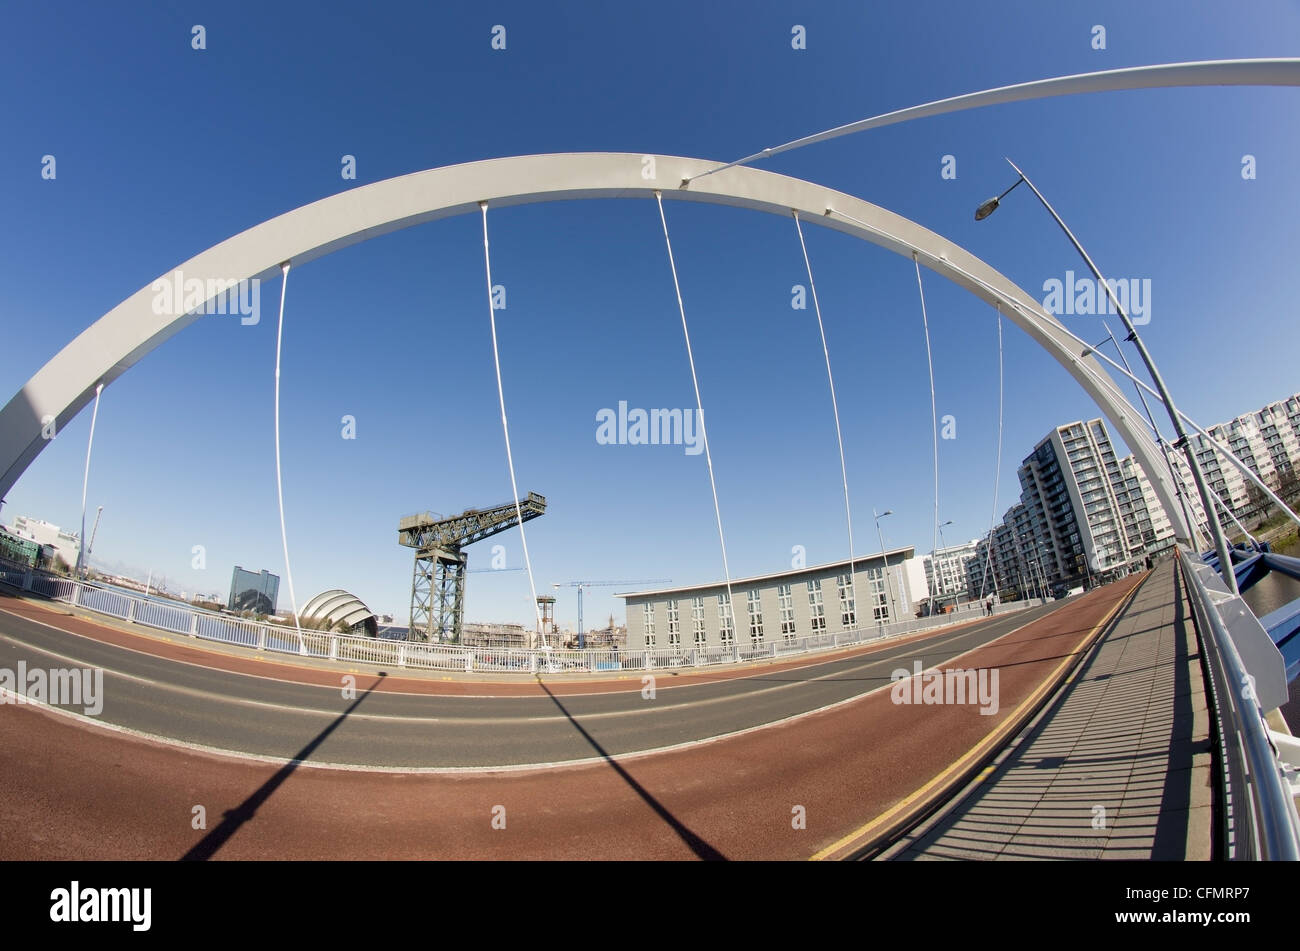 Sunshine and blue sky in Glasgow. Fisheye lens used to show span of Clyde Arc Bridge and riverfront landmarks in the background. Stock Photo